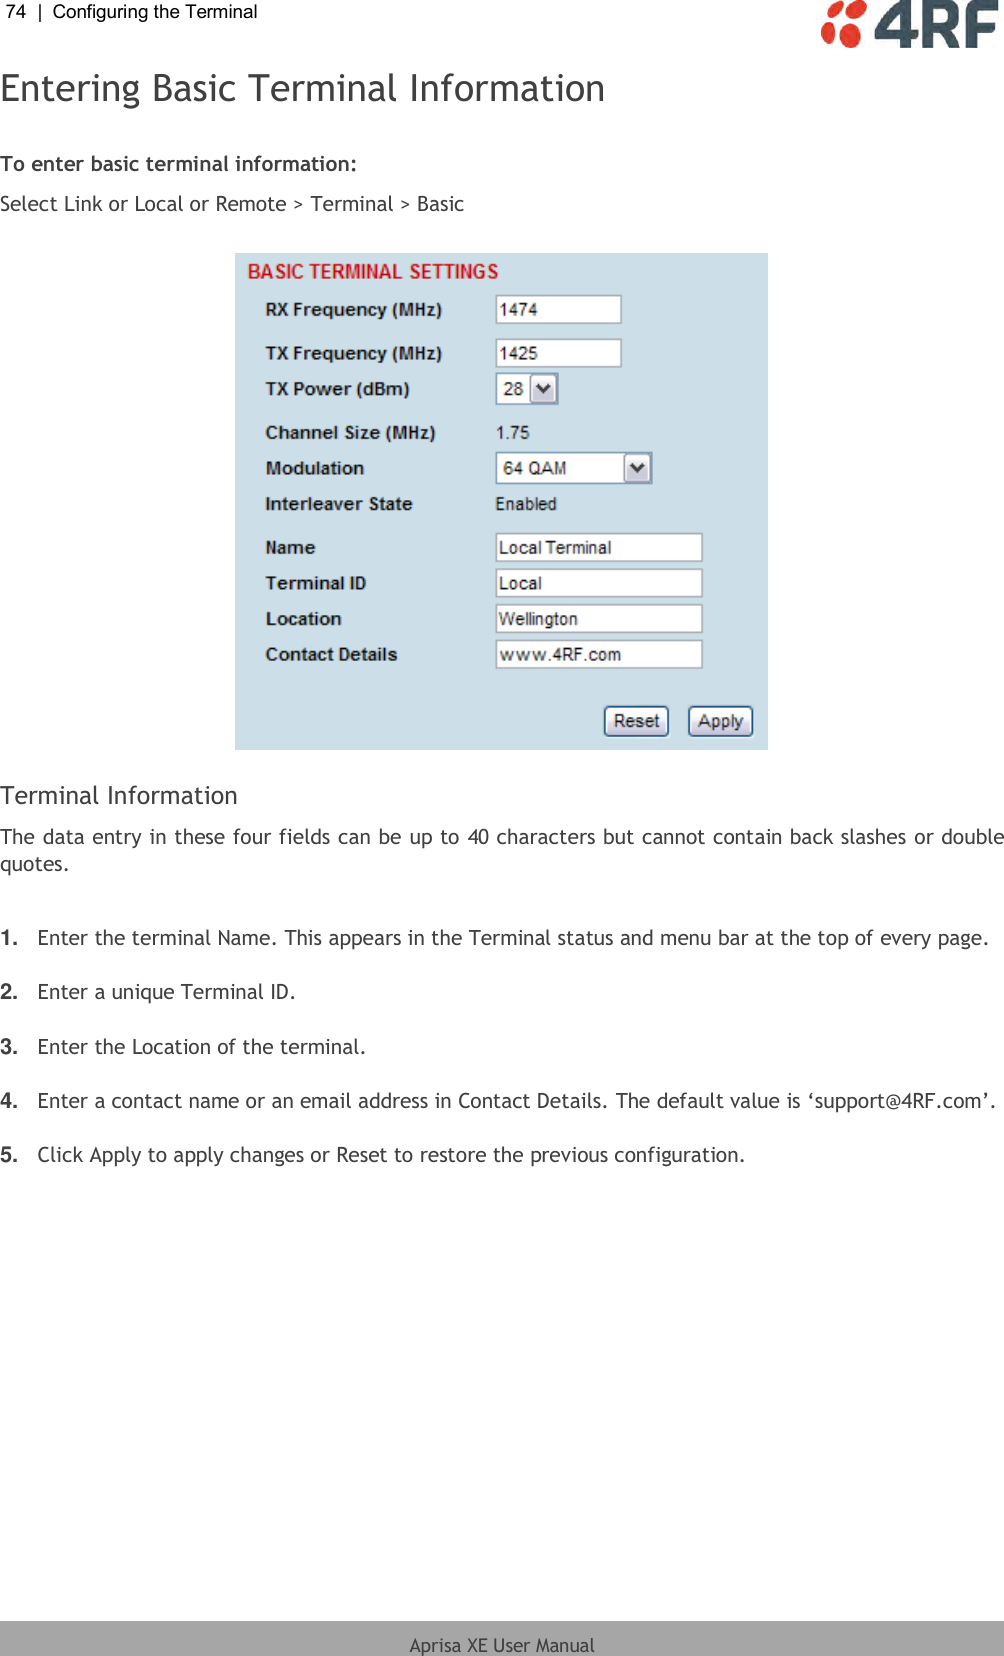 74  |  Configuring the Terminal   Aprisa XE User Manual  Entering Basic Terminal Information  To enter basic terminal information: Select Link or Local or Remote &gt; Terminal &gt; Basic    Terminal Information The data entry in these four fields can be up to 40 characters but cannot contain back slashes or double quotes.  1. Enter the terminal Name. This appears in the Terminal status and menu bar at the top of every page.  2. Enter a unique Terminal ID.  3. Enter the Location of the terminal.  4. Enter a contact name or an email address in Contact Details. The default value is ‘support@4RF.com’.  5. Click Apply to apply changes or Reset to restore the previous configuration.  